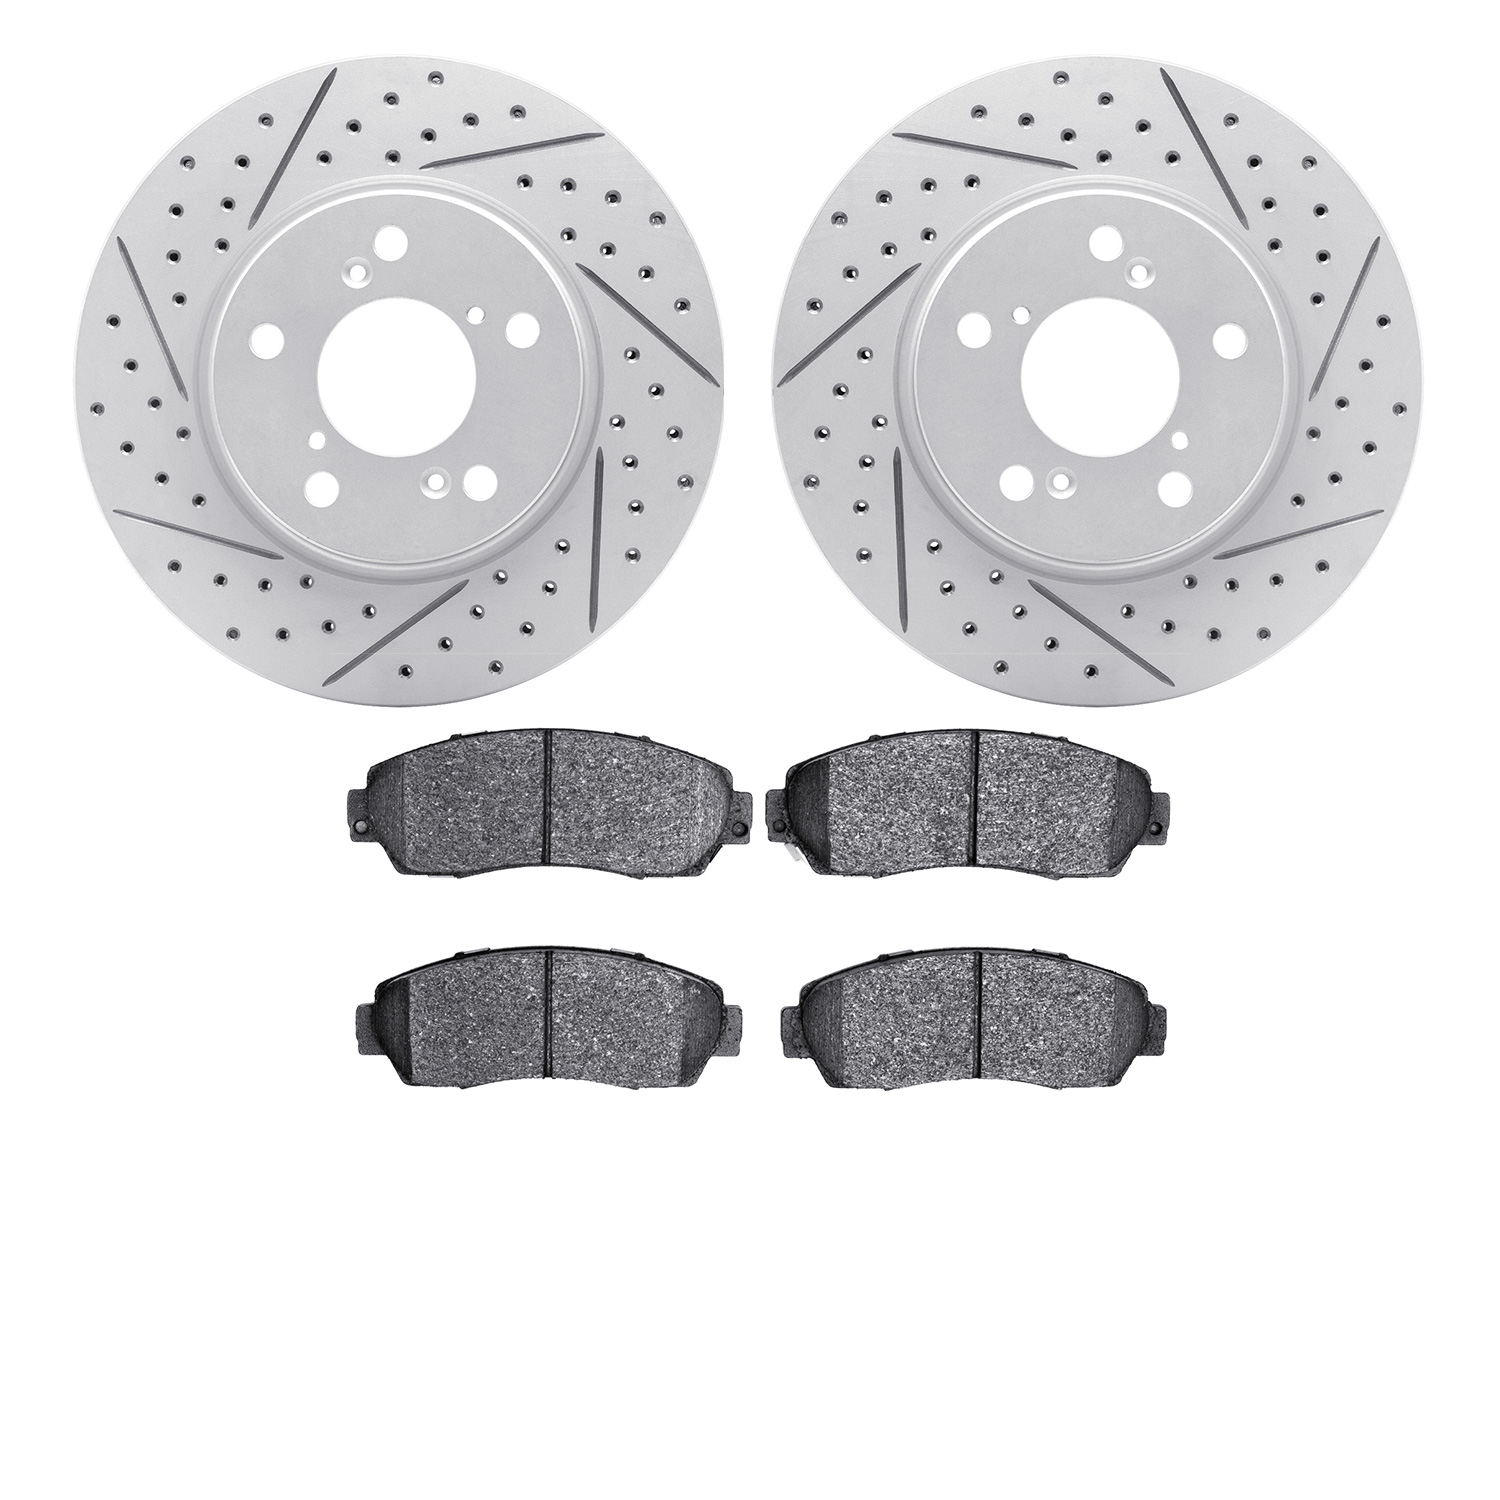 2502-59066 Geoperformance Drilled/Slotted Rotors w/5000 Advanced Brake Pads Kit, 2005-2010 Acura/Honda, Position: Front